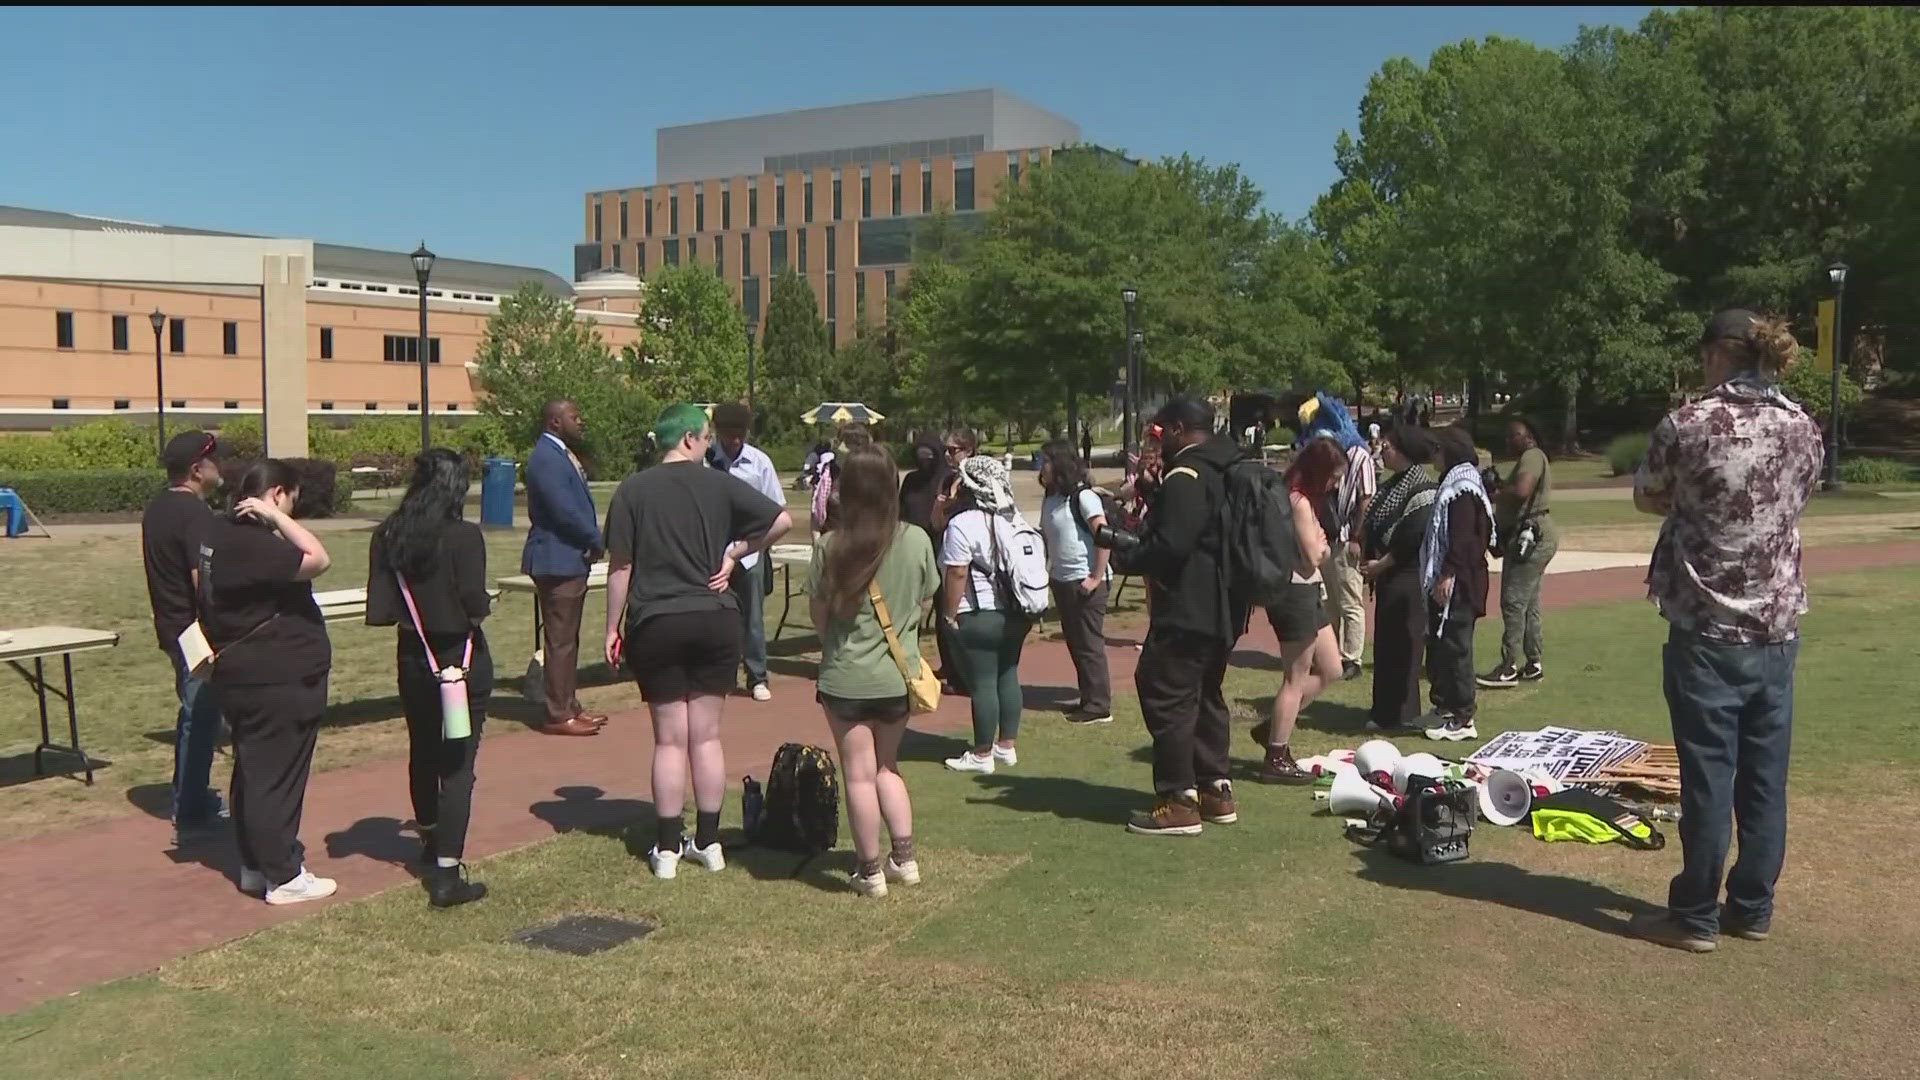 The protest walkout follows a number of similar protest actions that have spread to campuses nationwide.